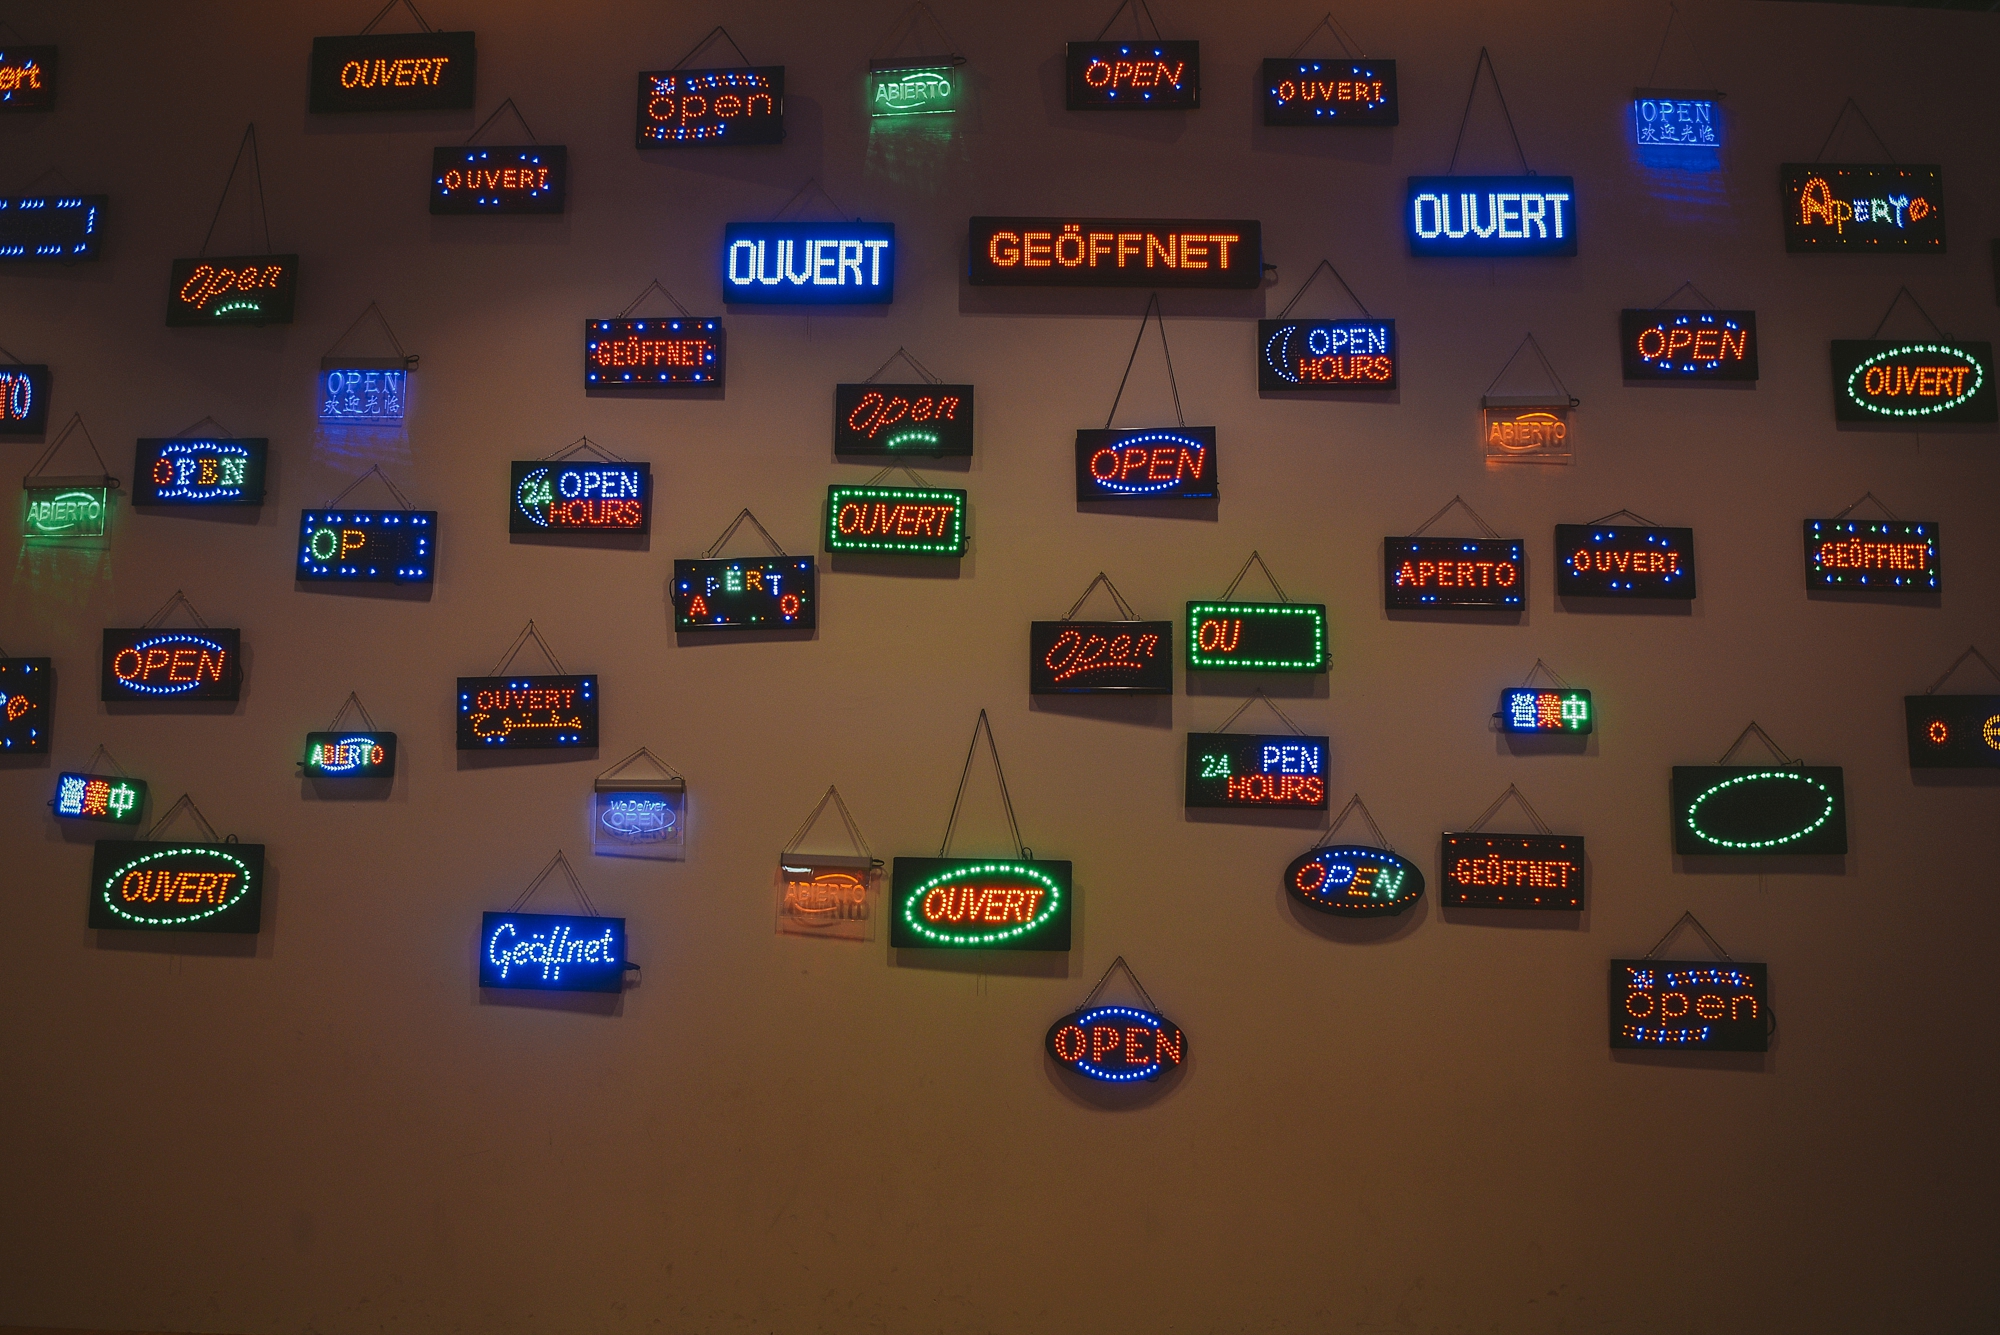 open signs in various languages_0026.jpg